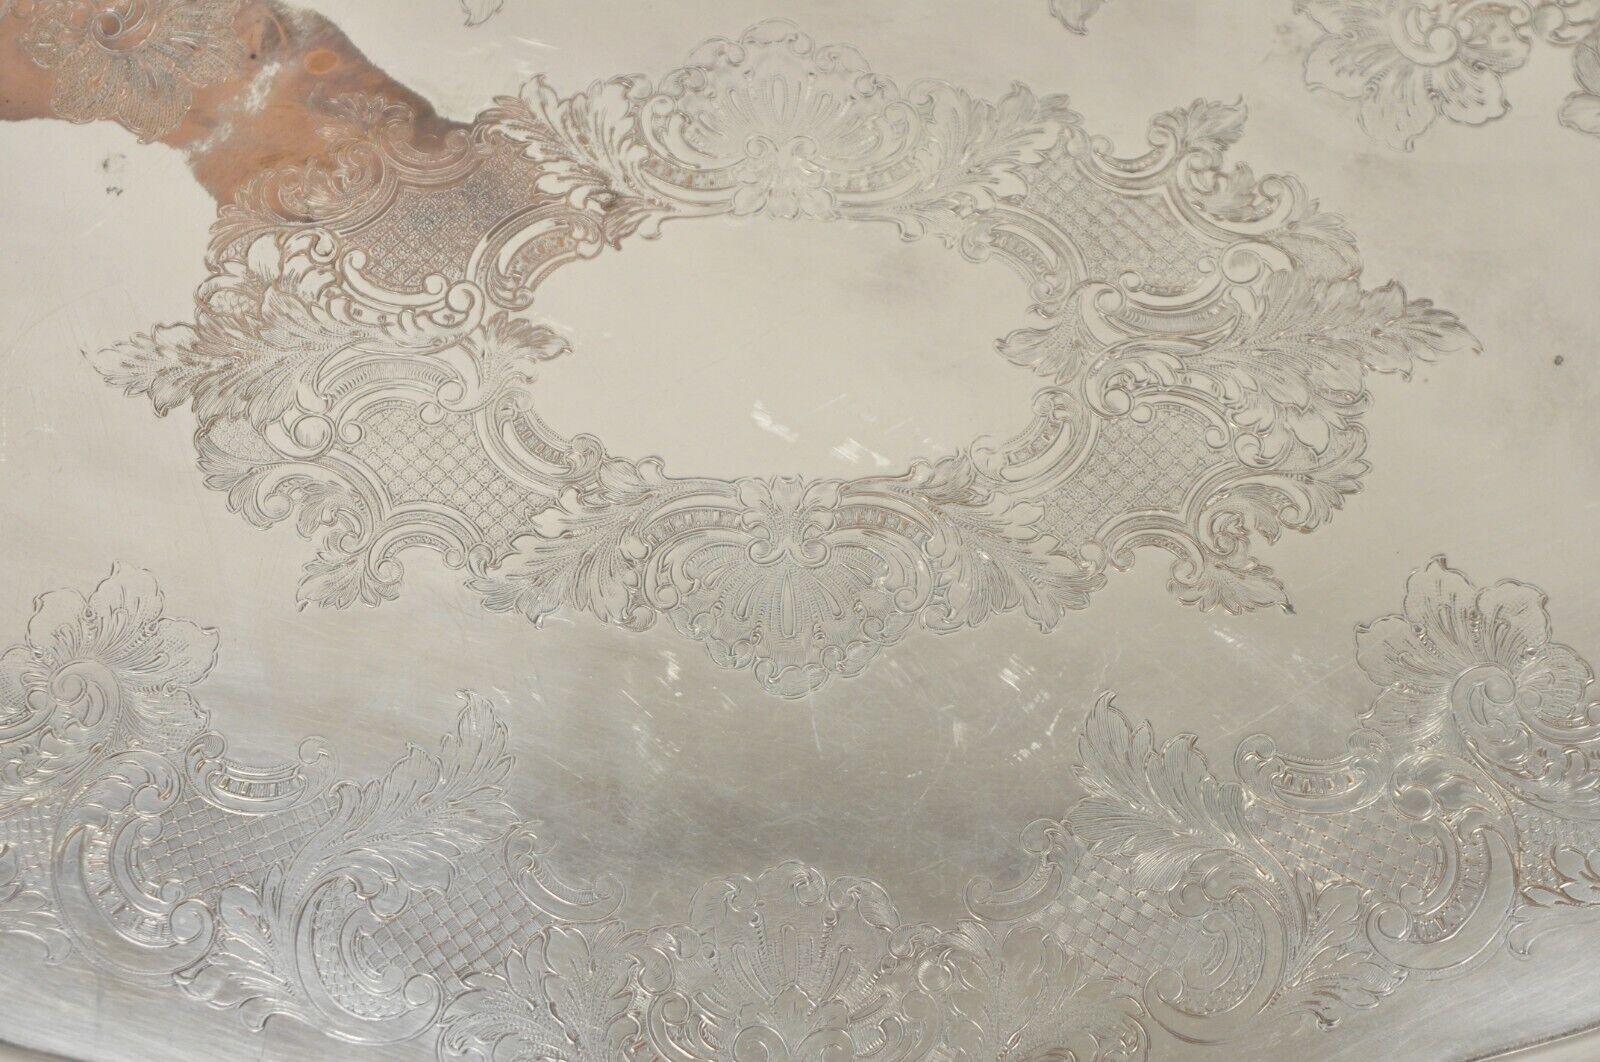 Antique English Victorian Silver Plated Ornate Oval Serving Platter Tray For Sale 2